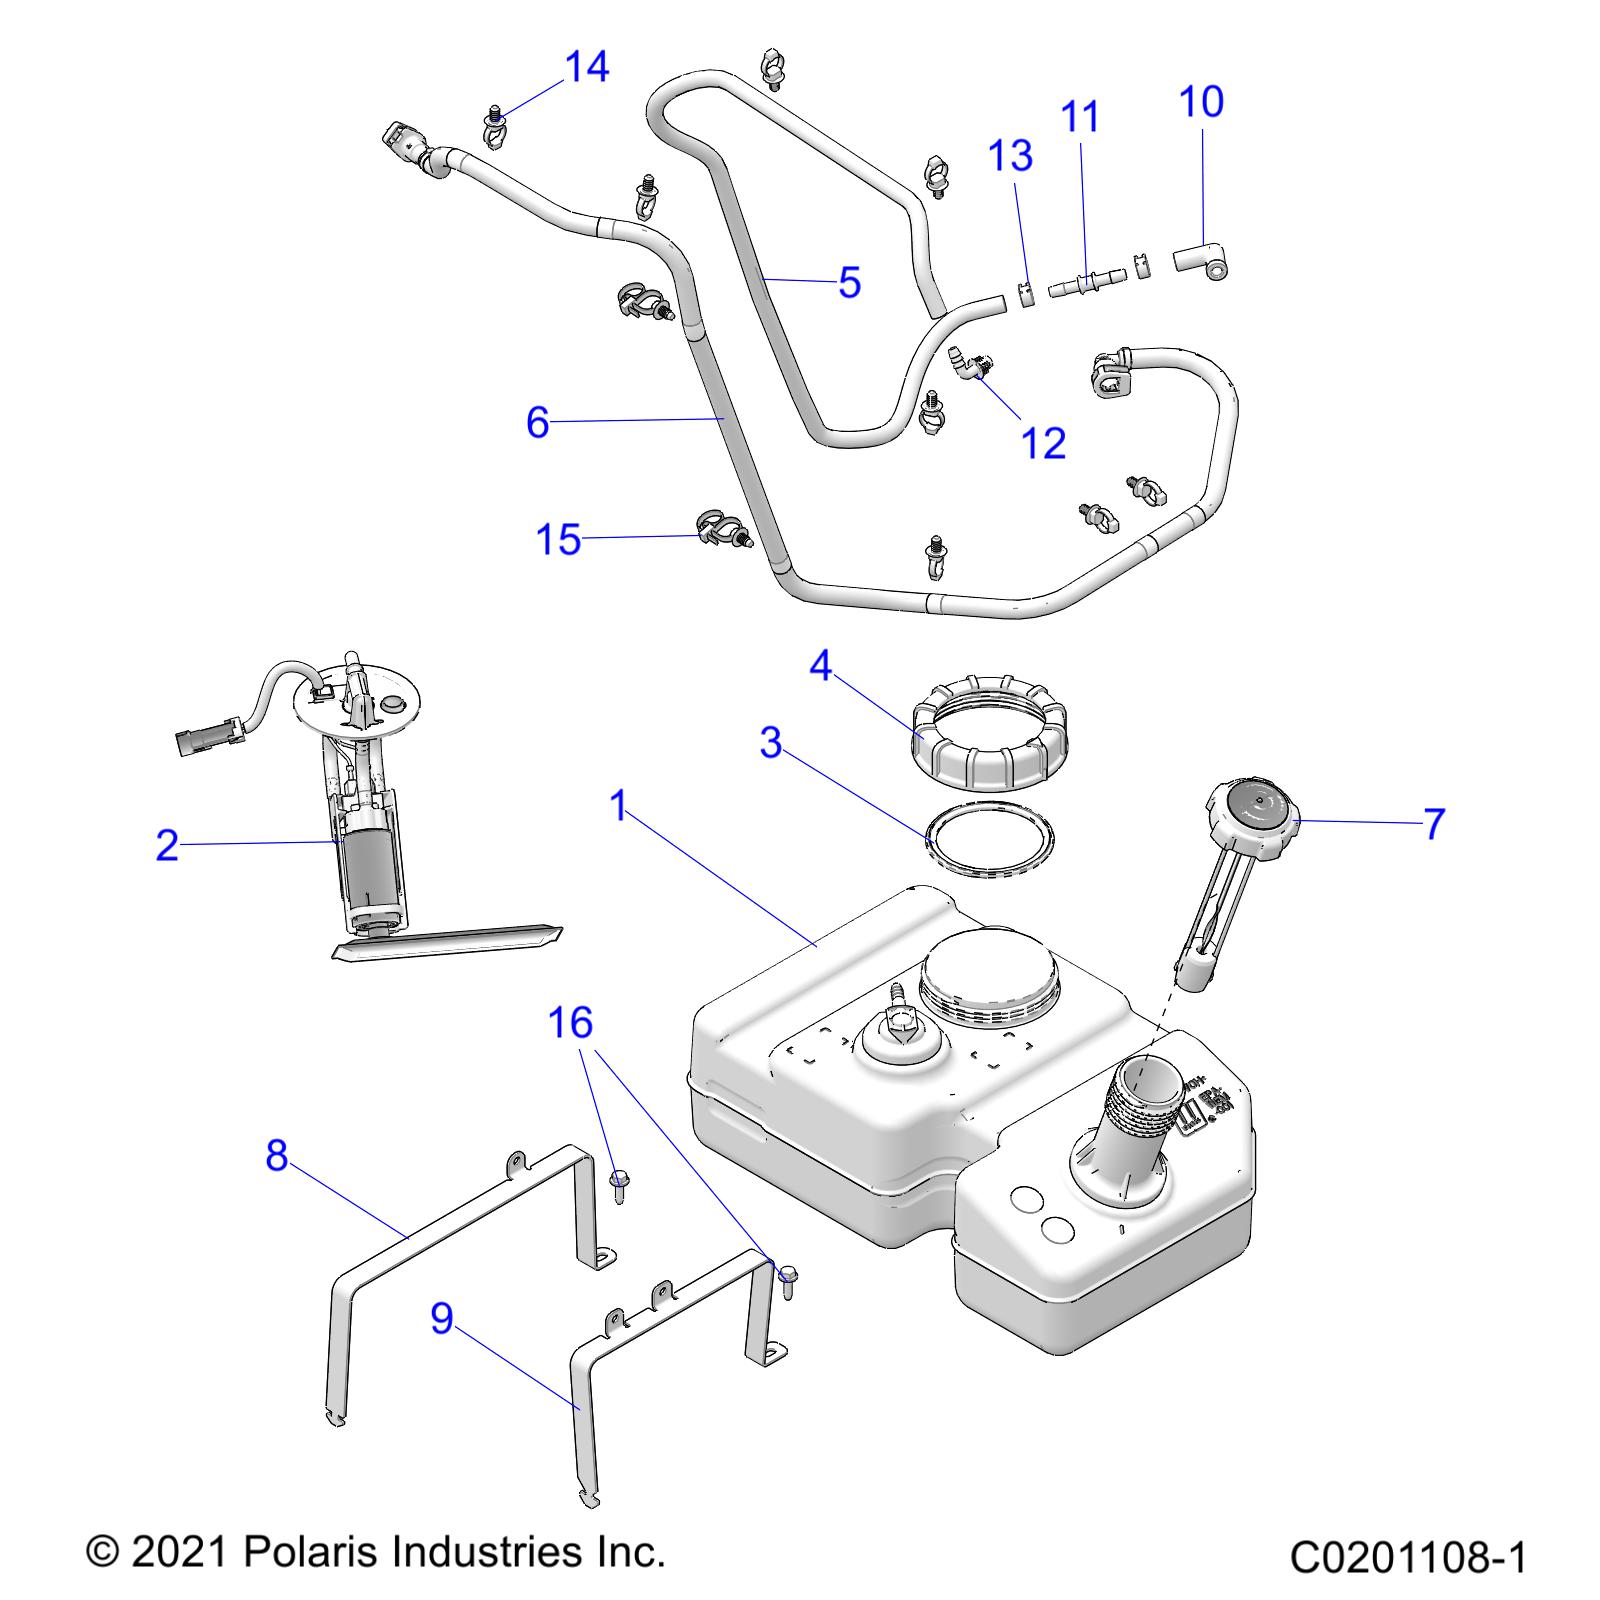 Part Number : 2522076 FUEL TANK ASSEMBLY